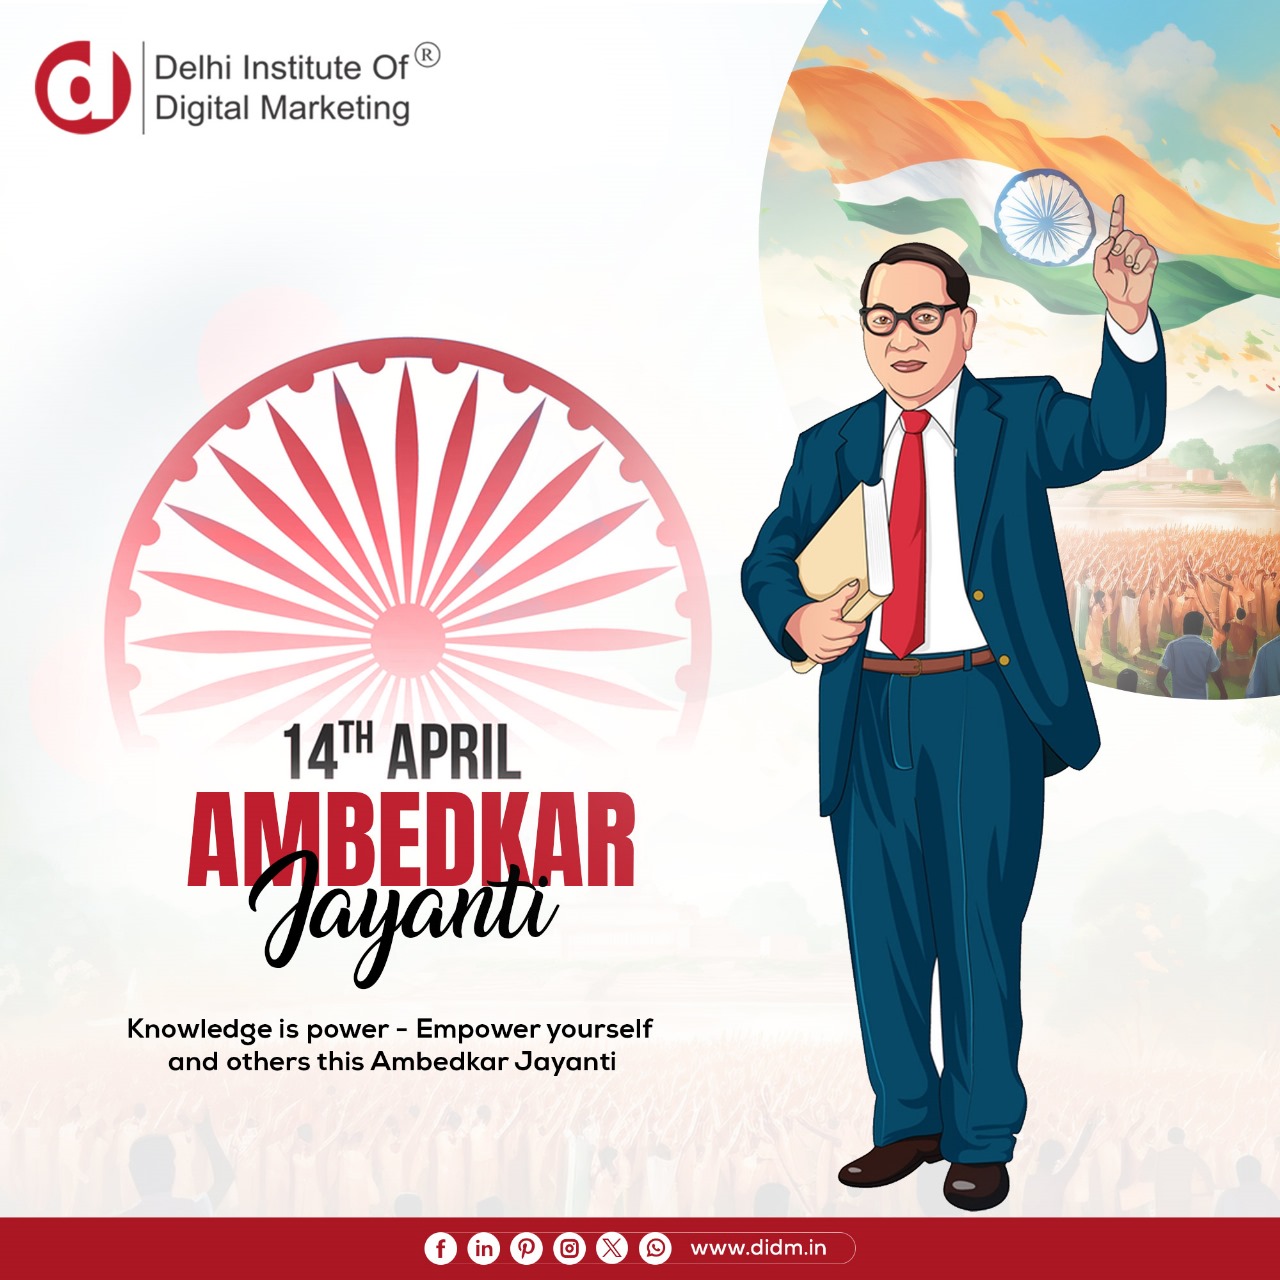 DIDM Celebrates Ambedkar Jayanti with Honor and Respect